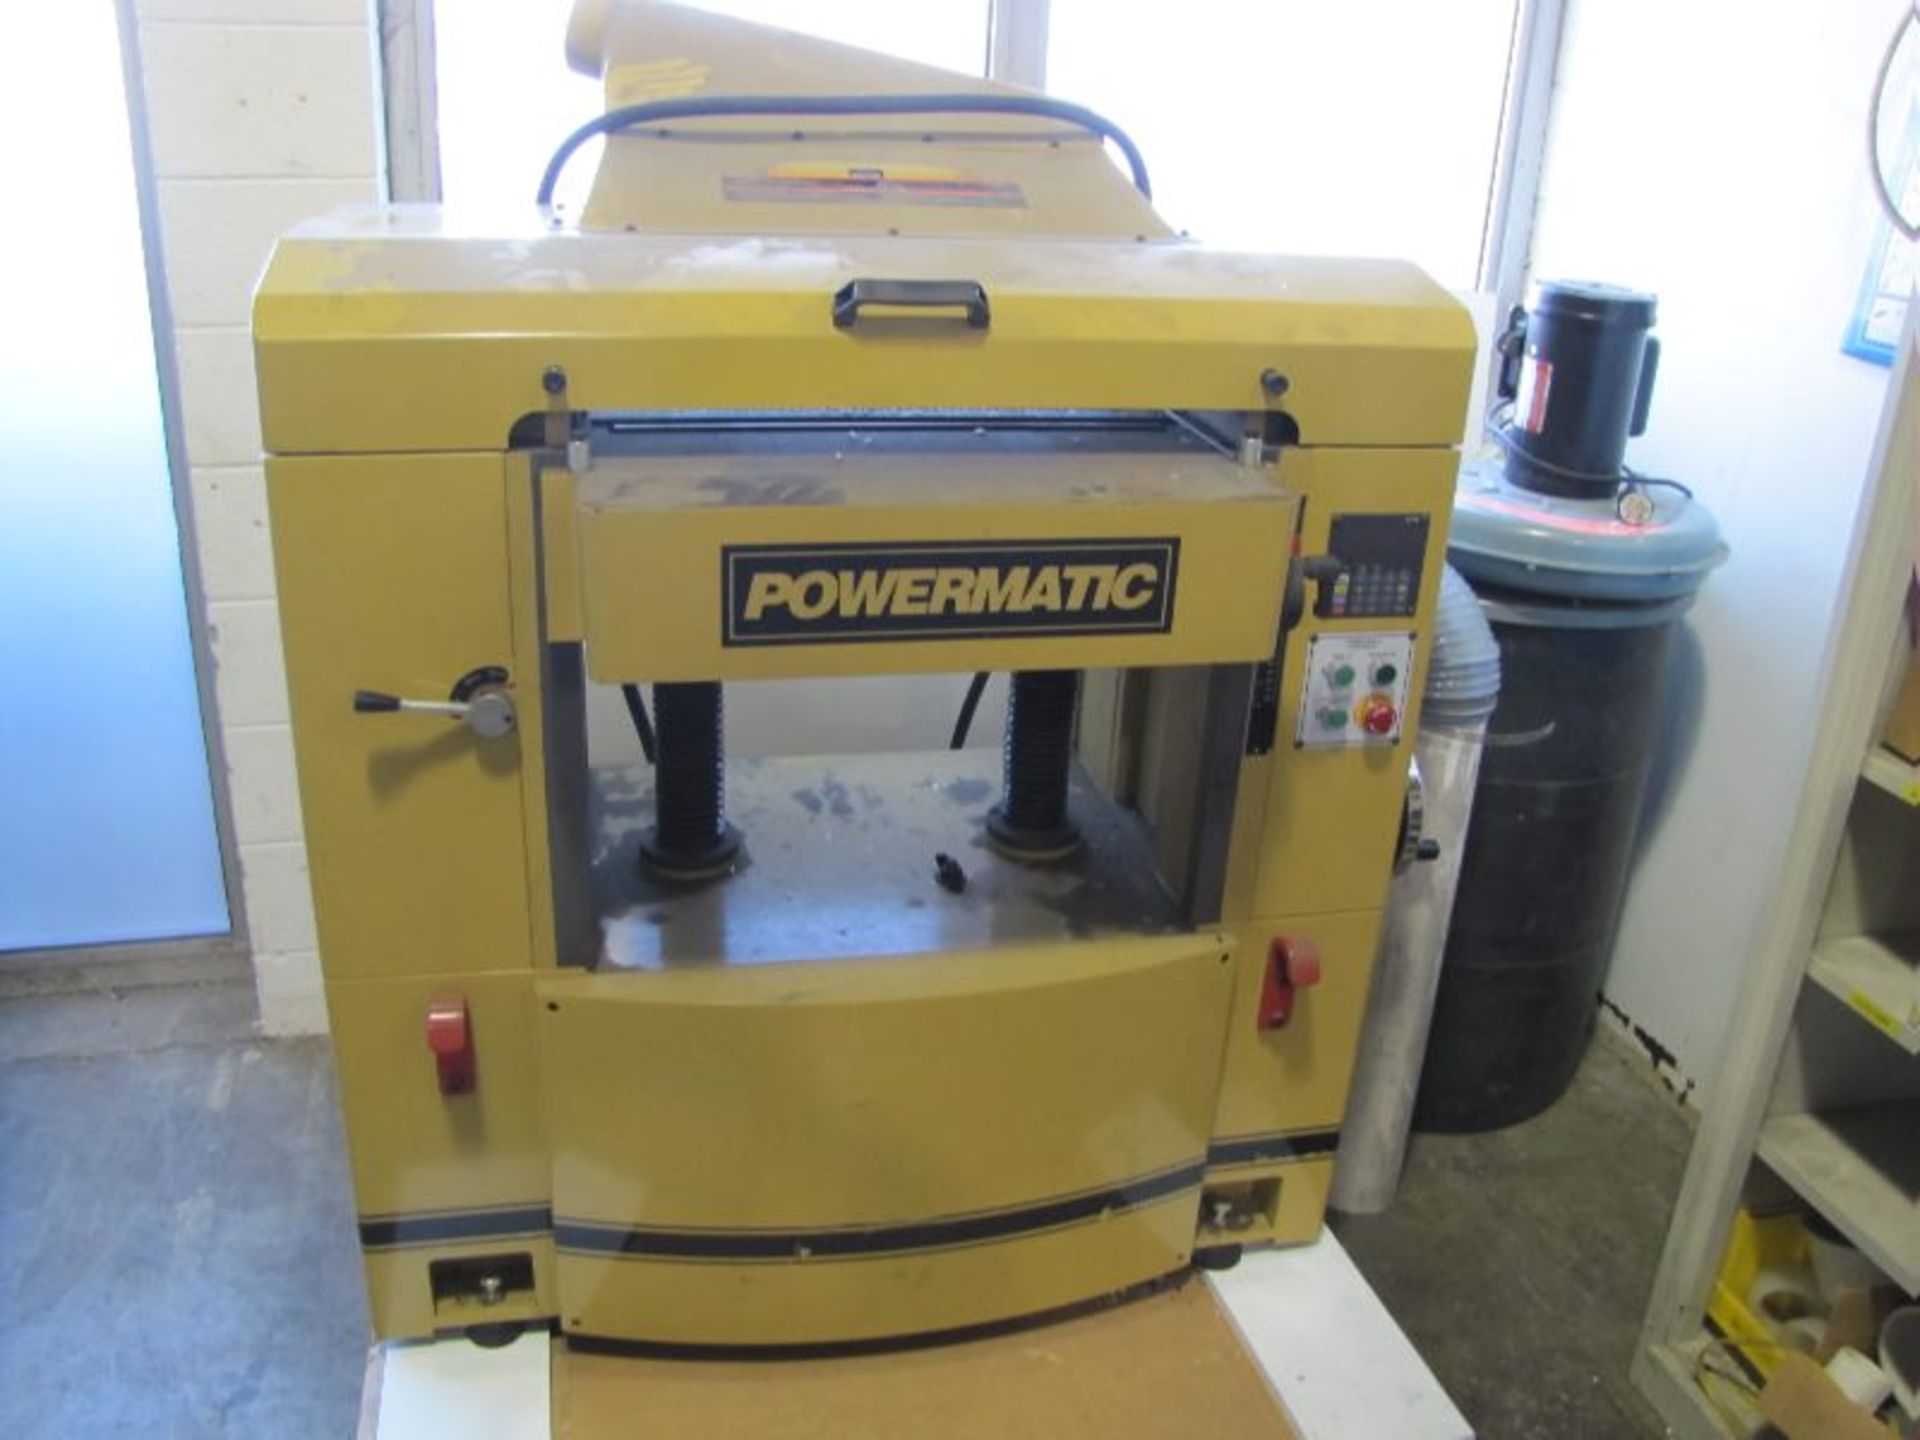 Powermatic Model WP2510 Planner with Helical Cutterhead, S/N: 14100469 Approx. MFG. 2014, MPN: 1791